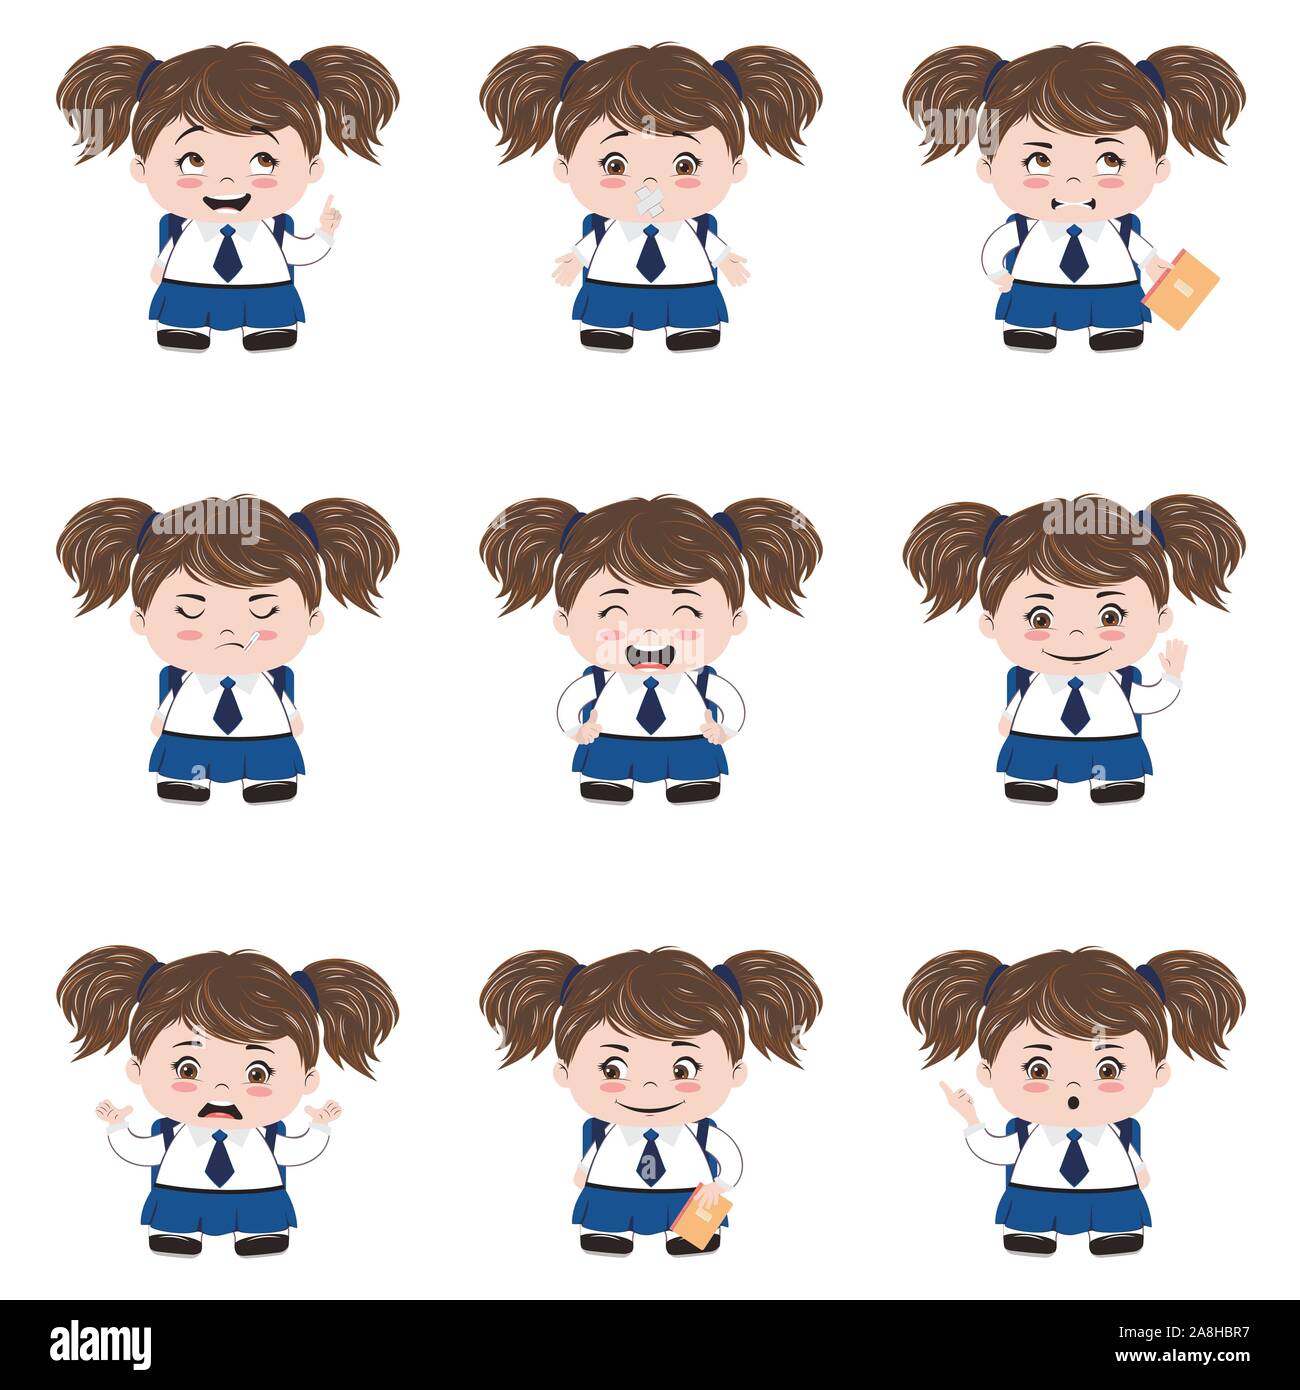 Cartoon Character White Girl In Jeans Set With Different Postures Attitudes  And Poses Doing Different Activities In Isolated Vector Illustrations Stock  Illustration - Download Image Now - iStock